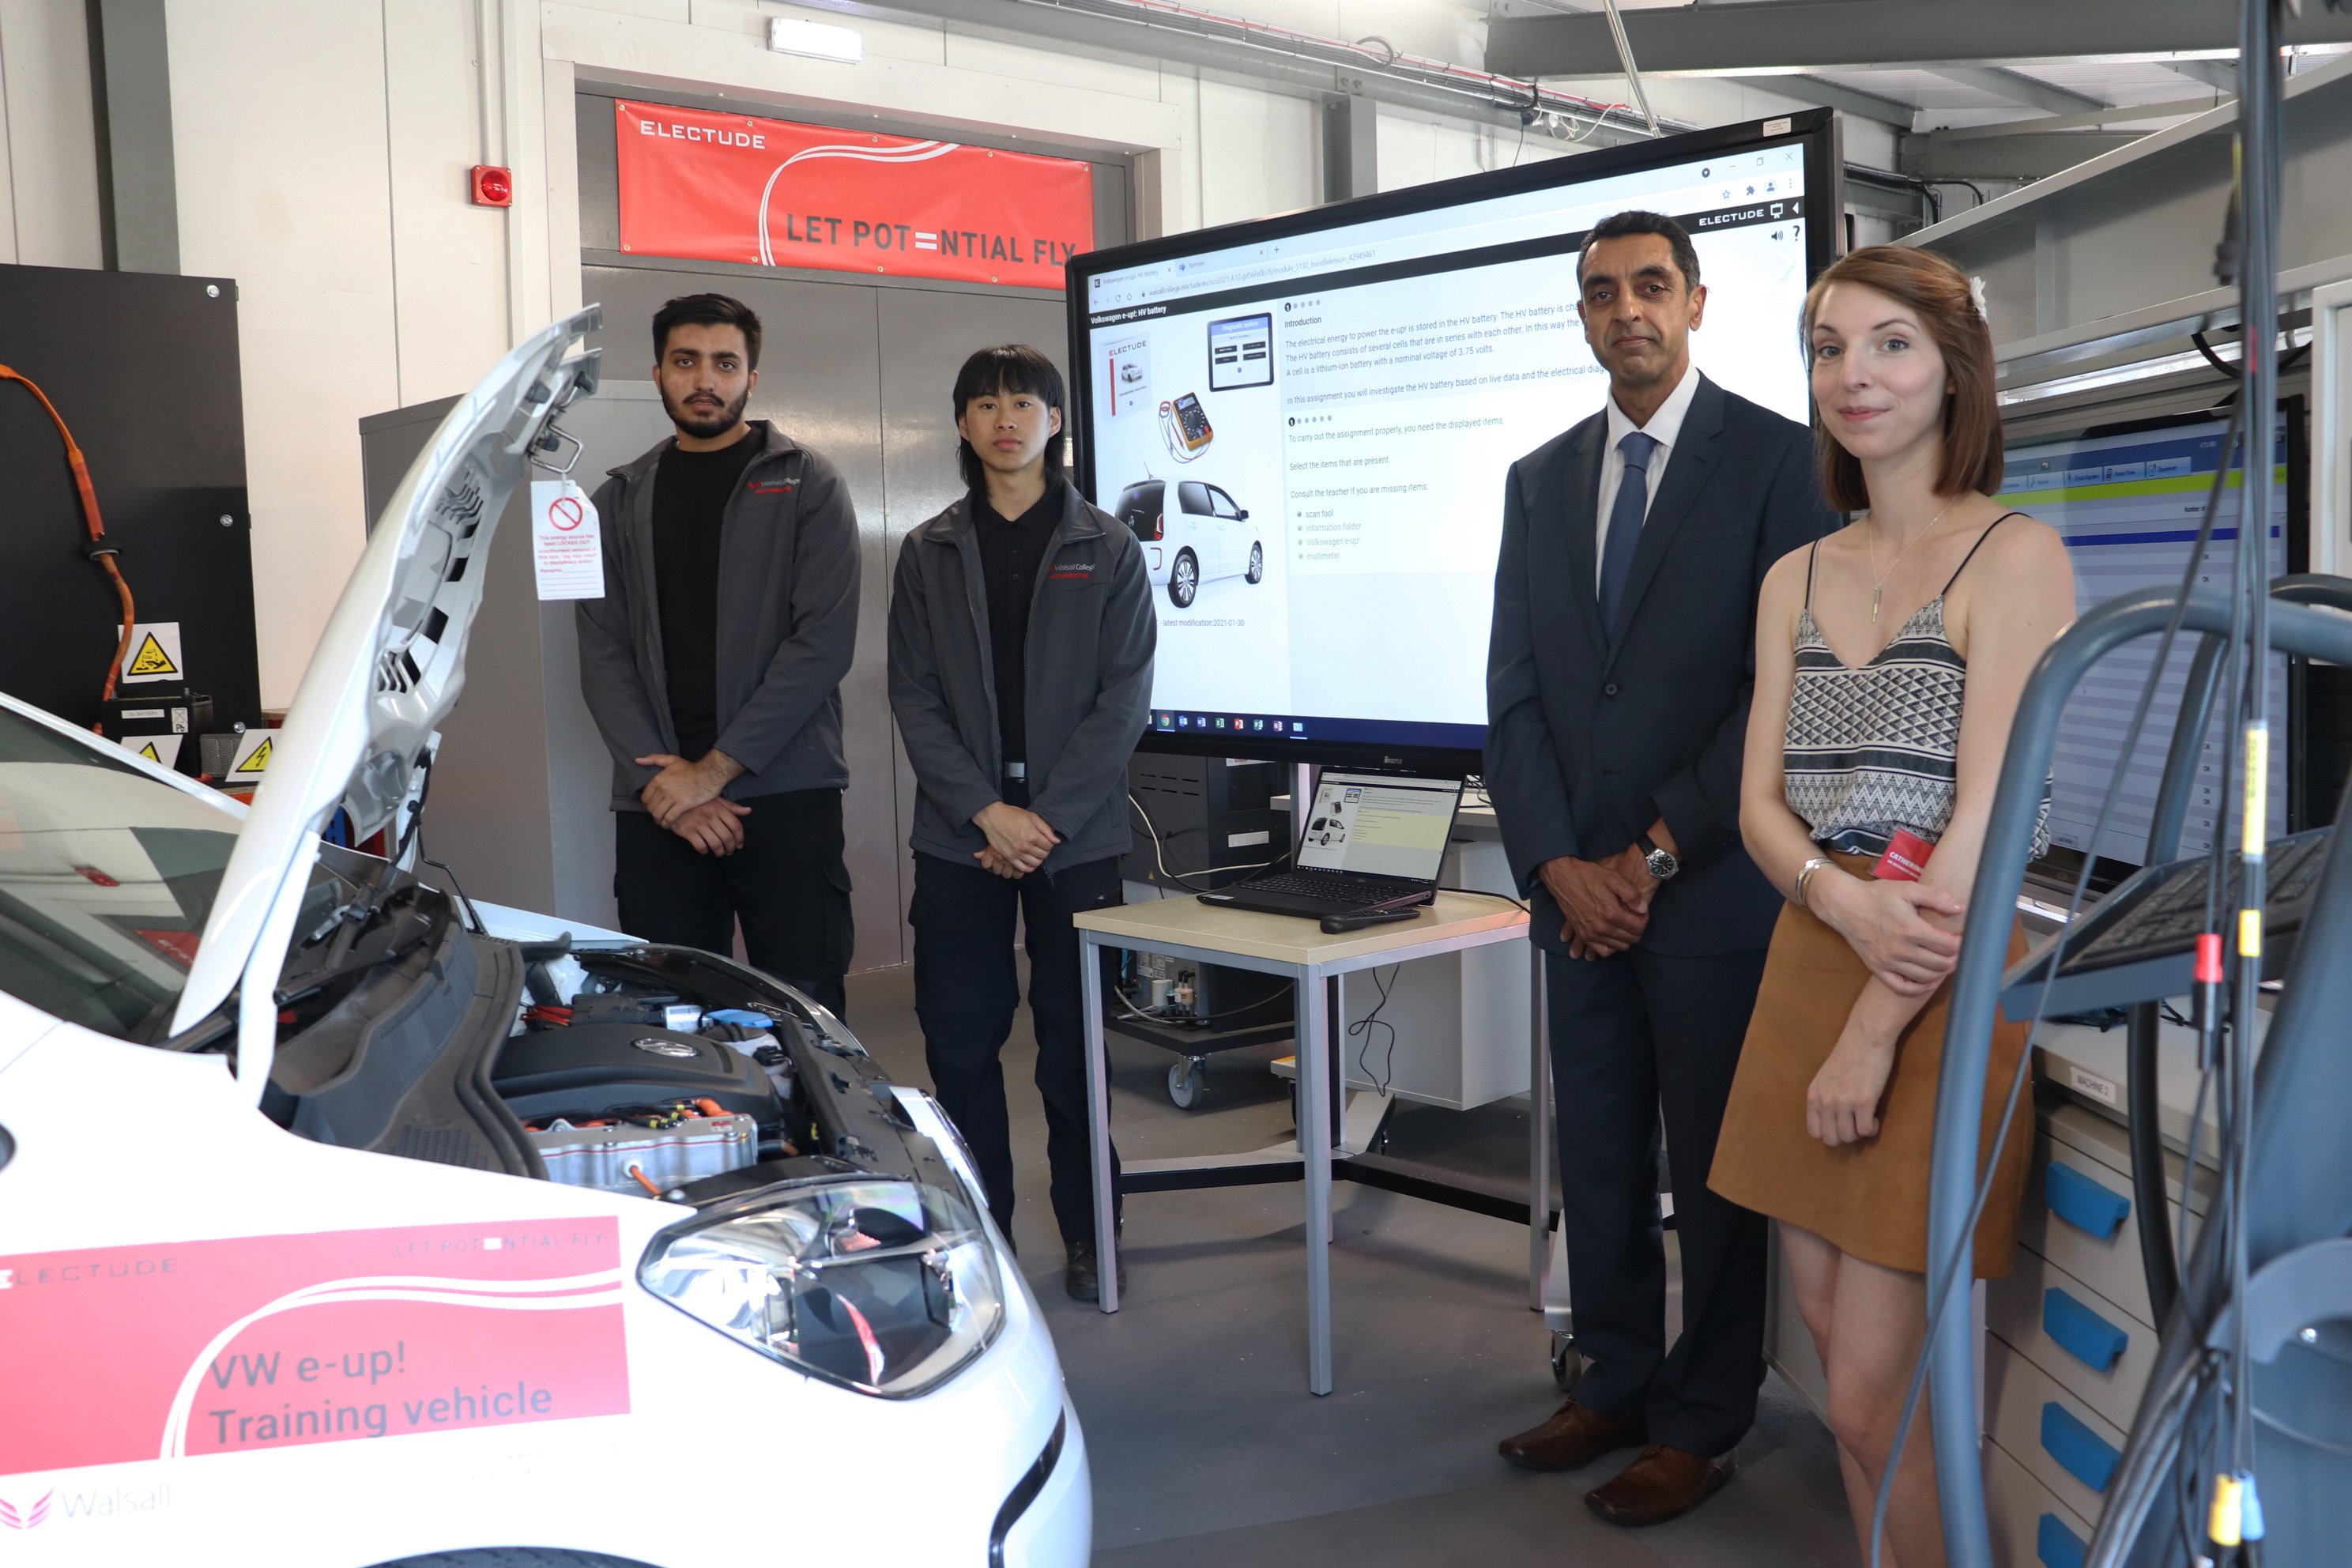 L-R Students Bhupinder Johal and Marcus Alarcon are pictured at the launch with Walsall College principal Jatinder Sharma and Catherine Treanor of Electude